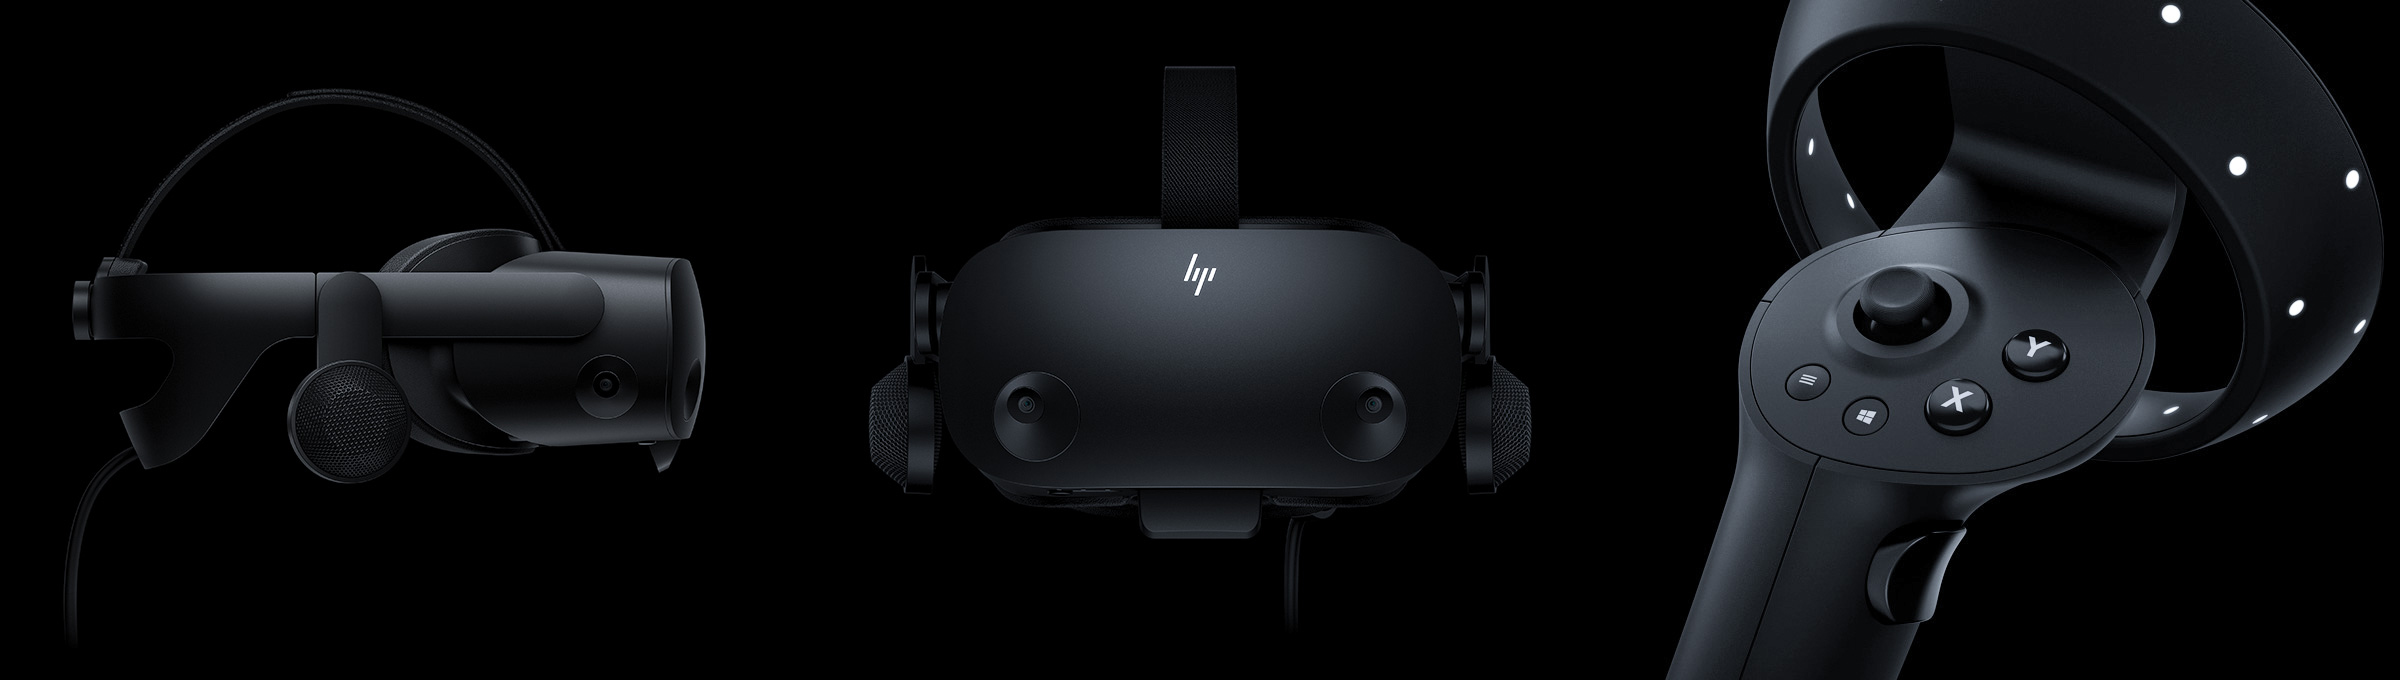 HP Reverb G2 Virtual Reality Headset Specifications